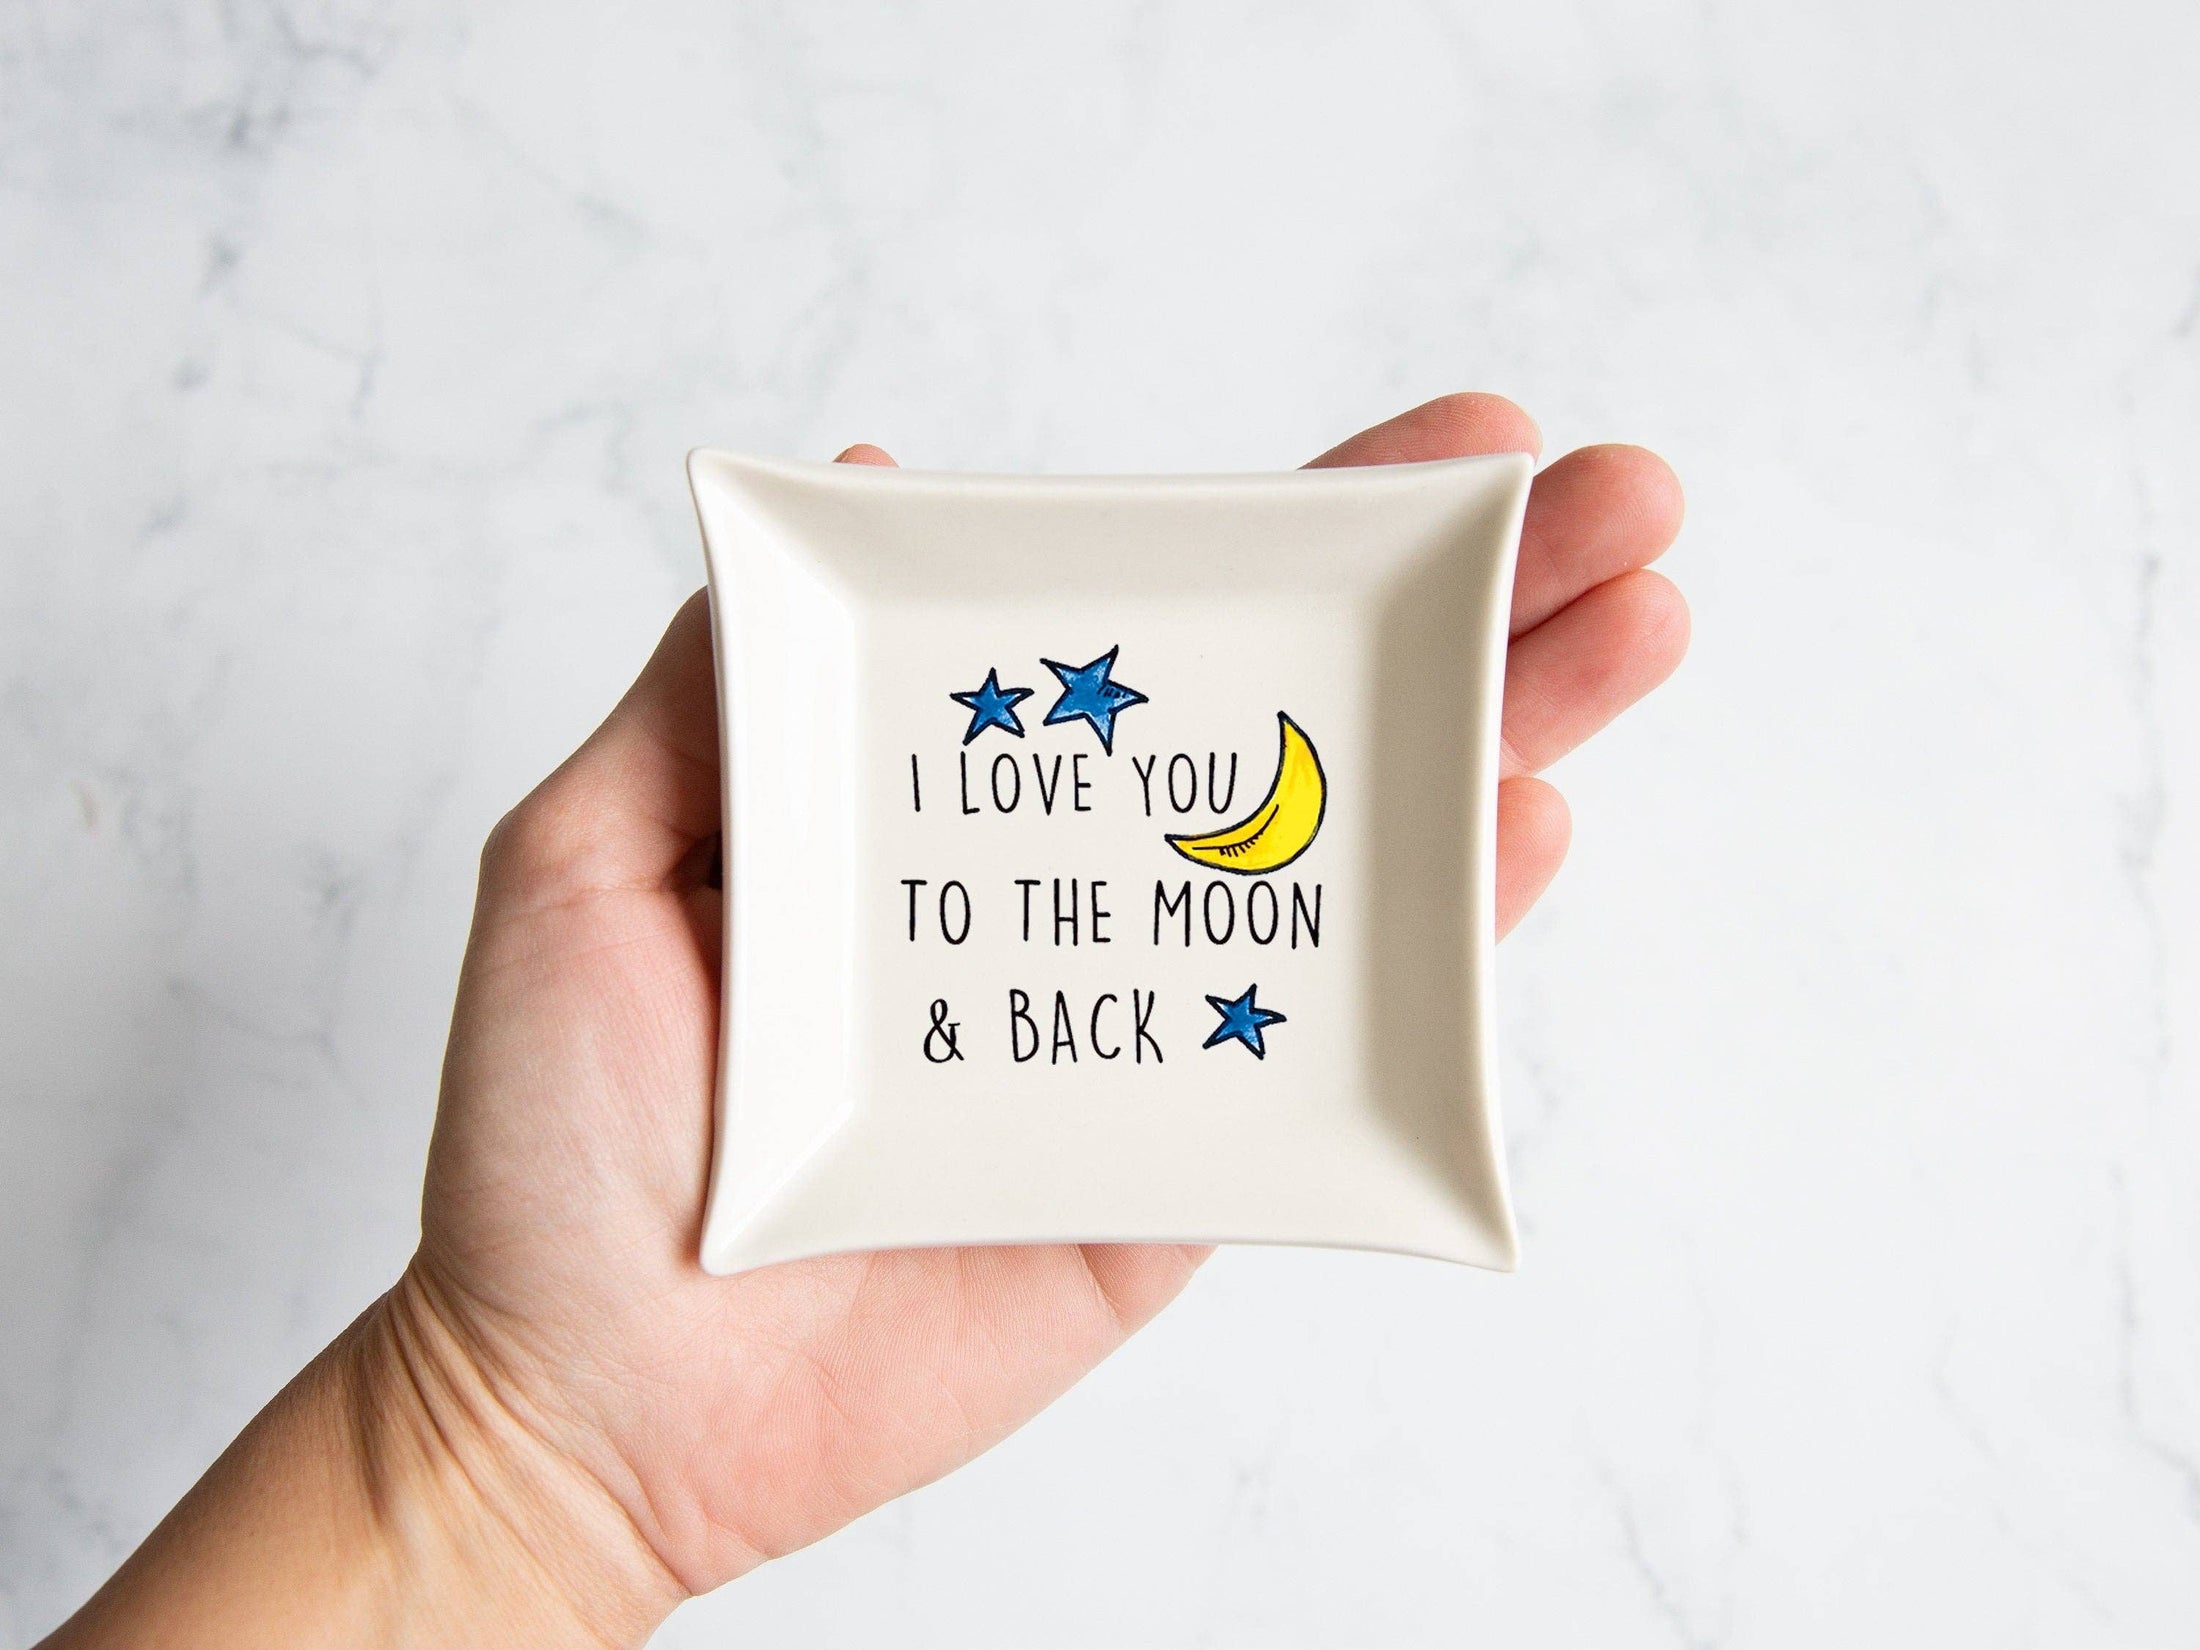 Trinket Dish: Love You to Moon and Back